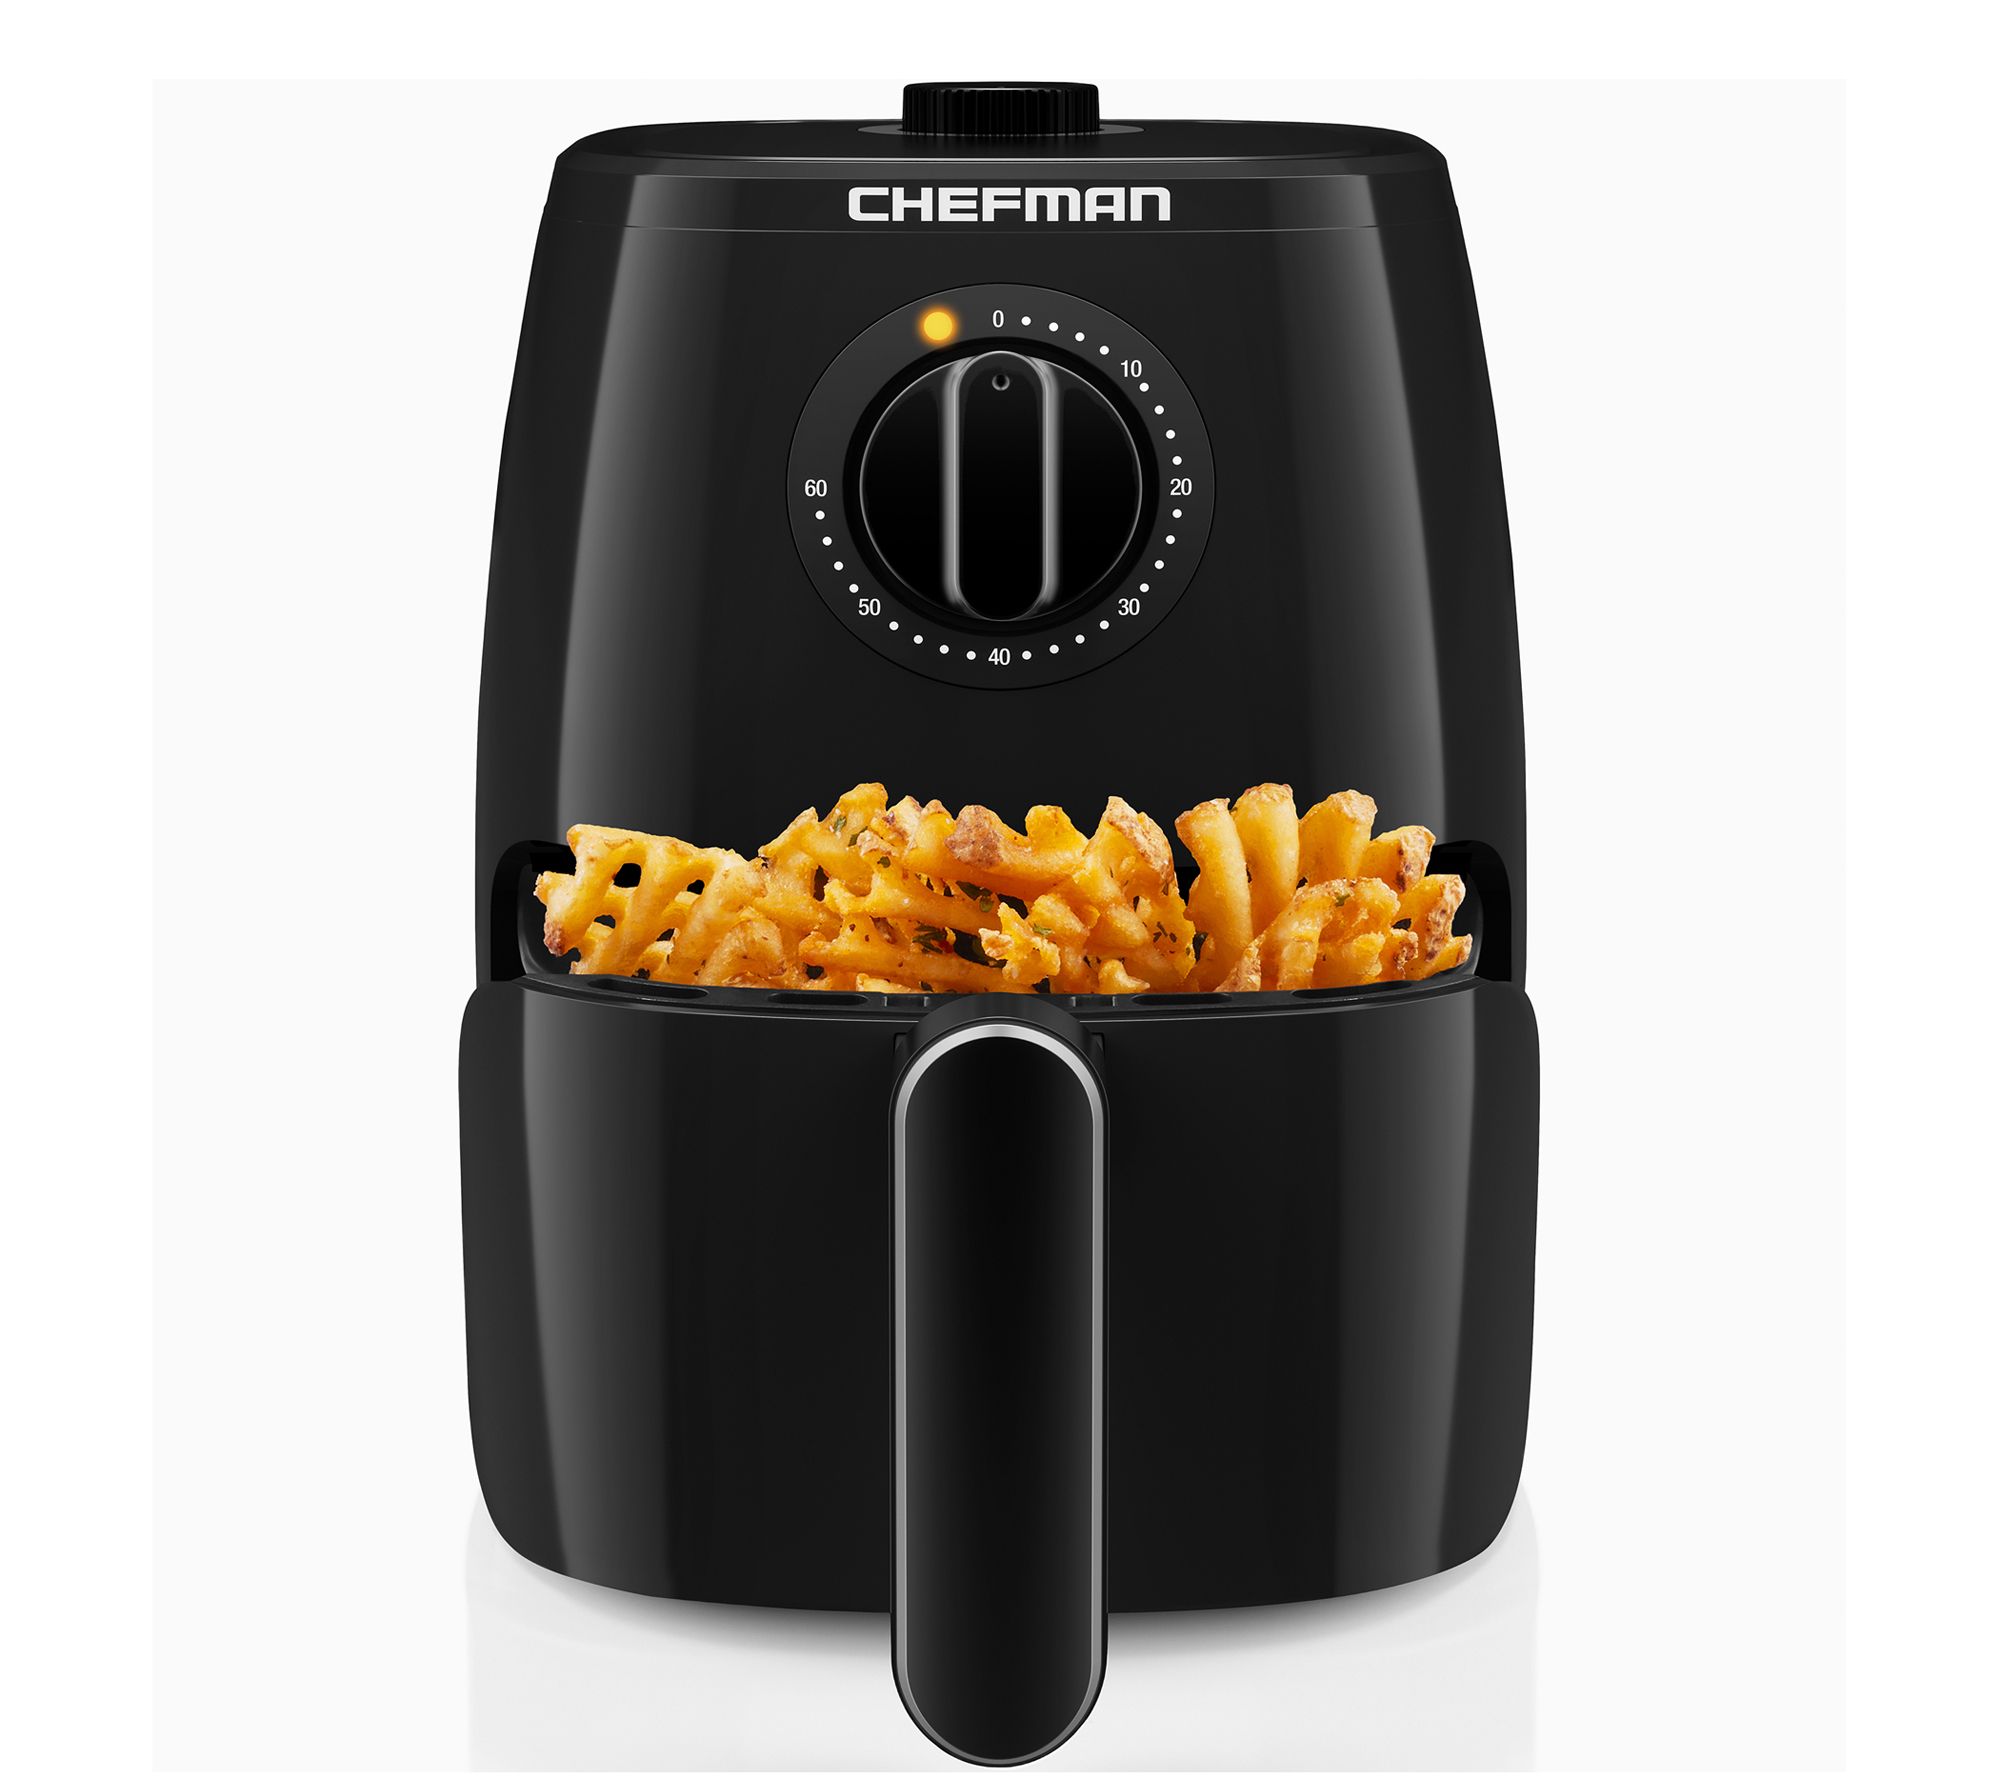 Elite Gourmet 2.1qt Hot Air Fryer with Adjustable Timer and